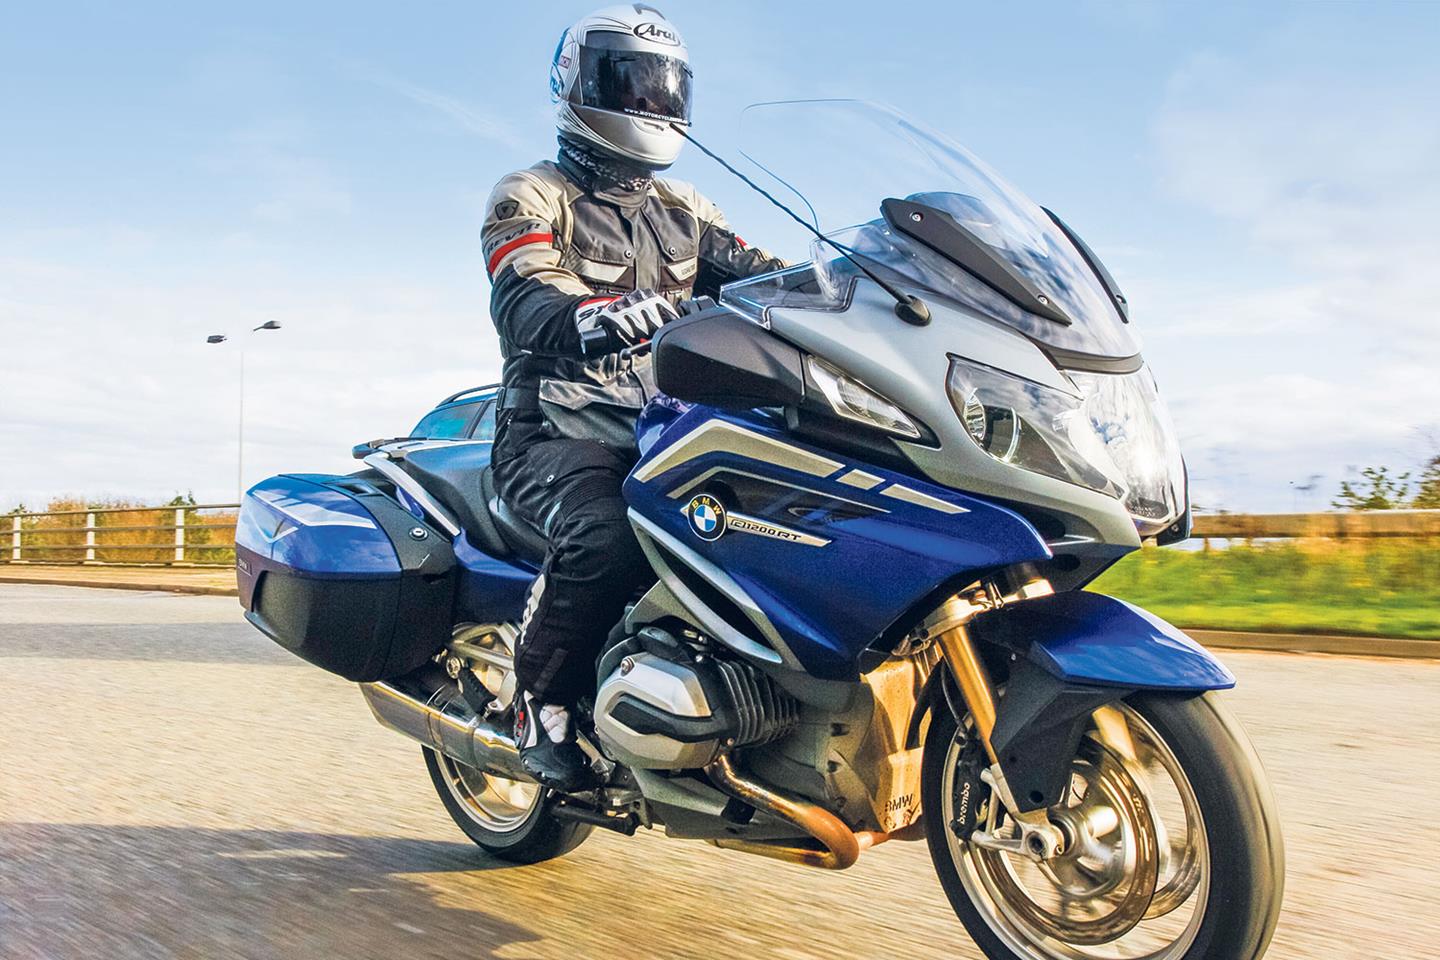 BMW R1200RT (2014-2019) Review | Speed, Specs & Prices